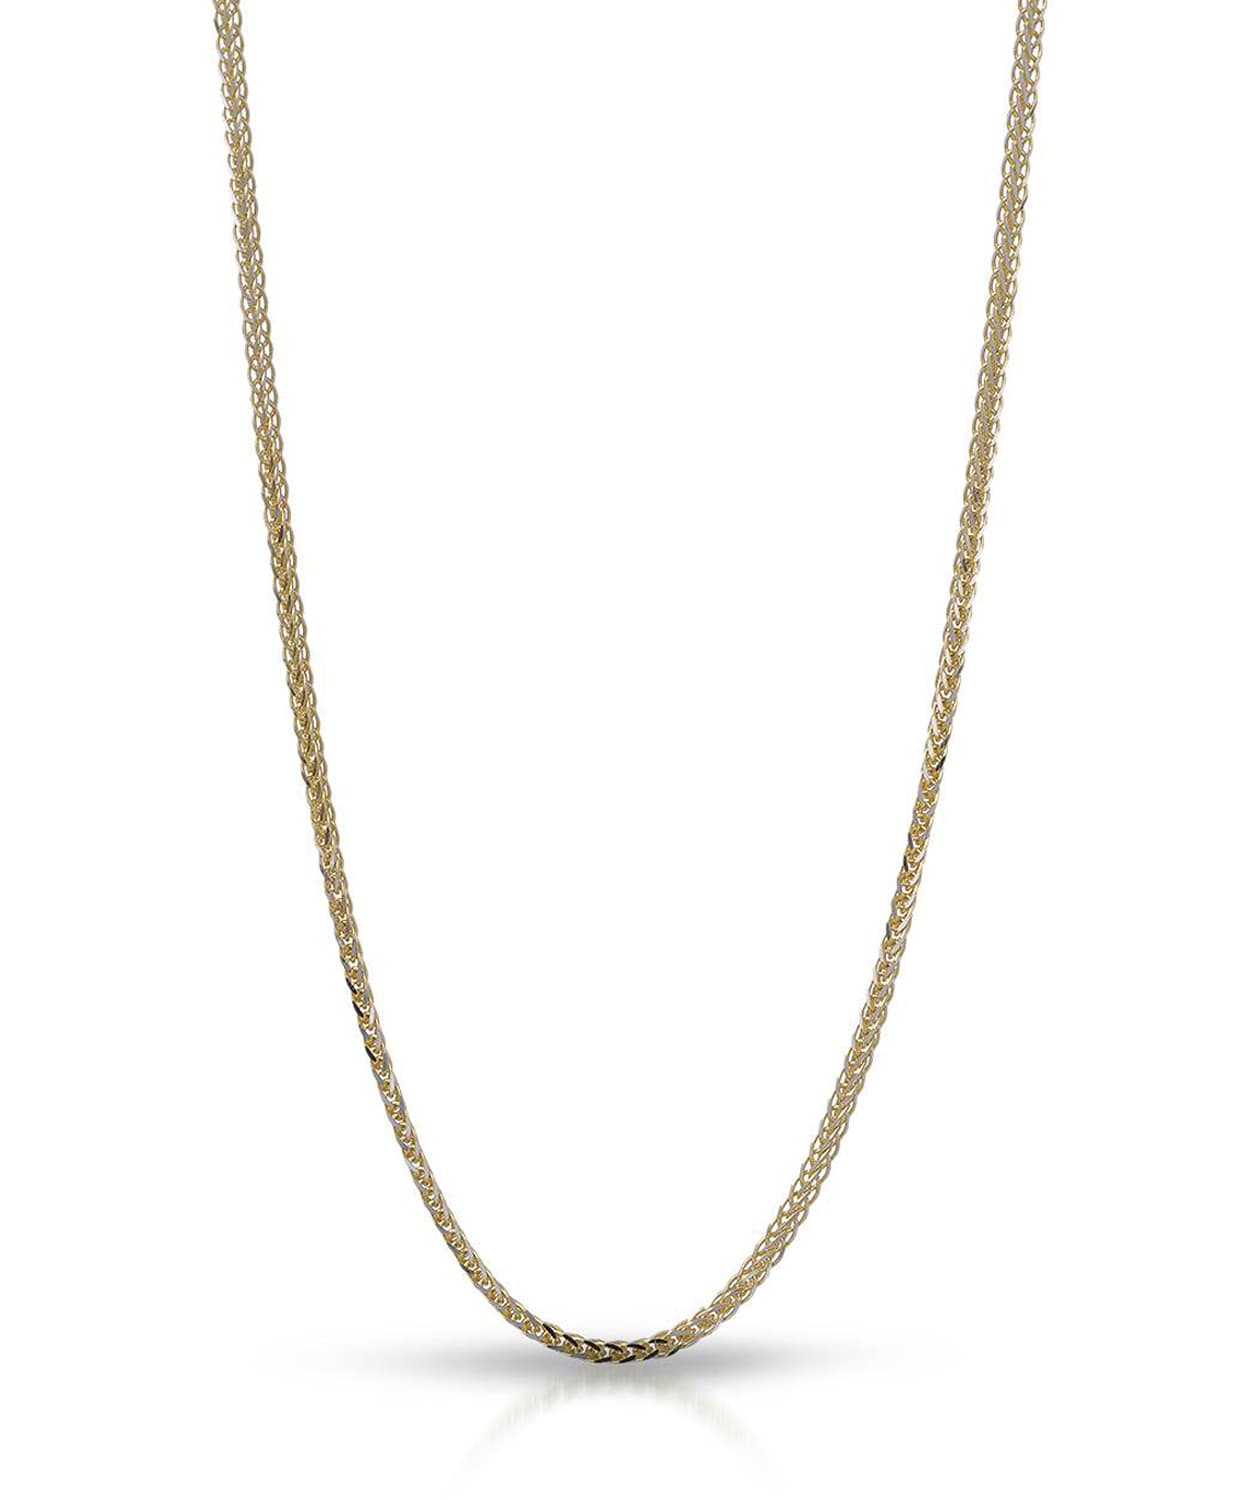 0.8mm 14k Two-Tone Gold Square Wheat Chain View 1